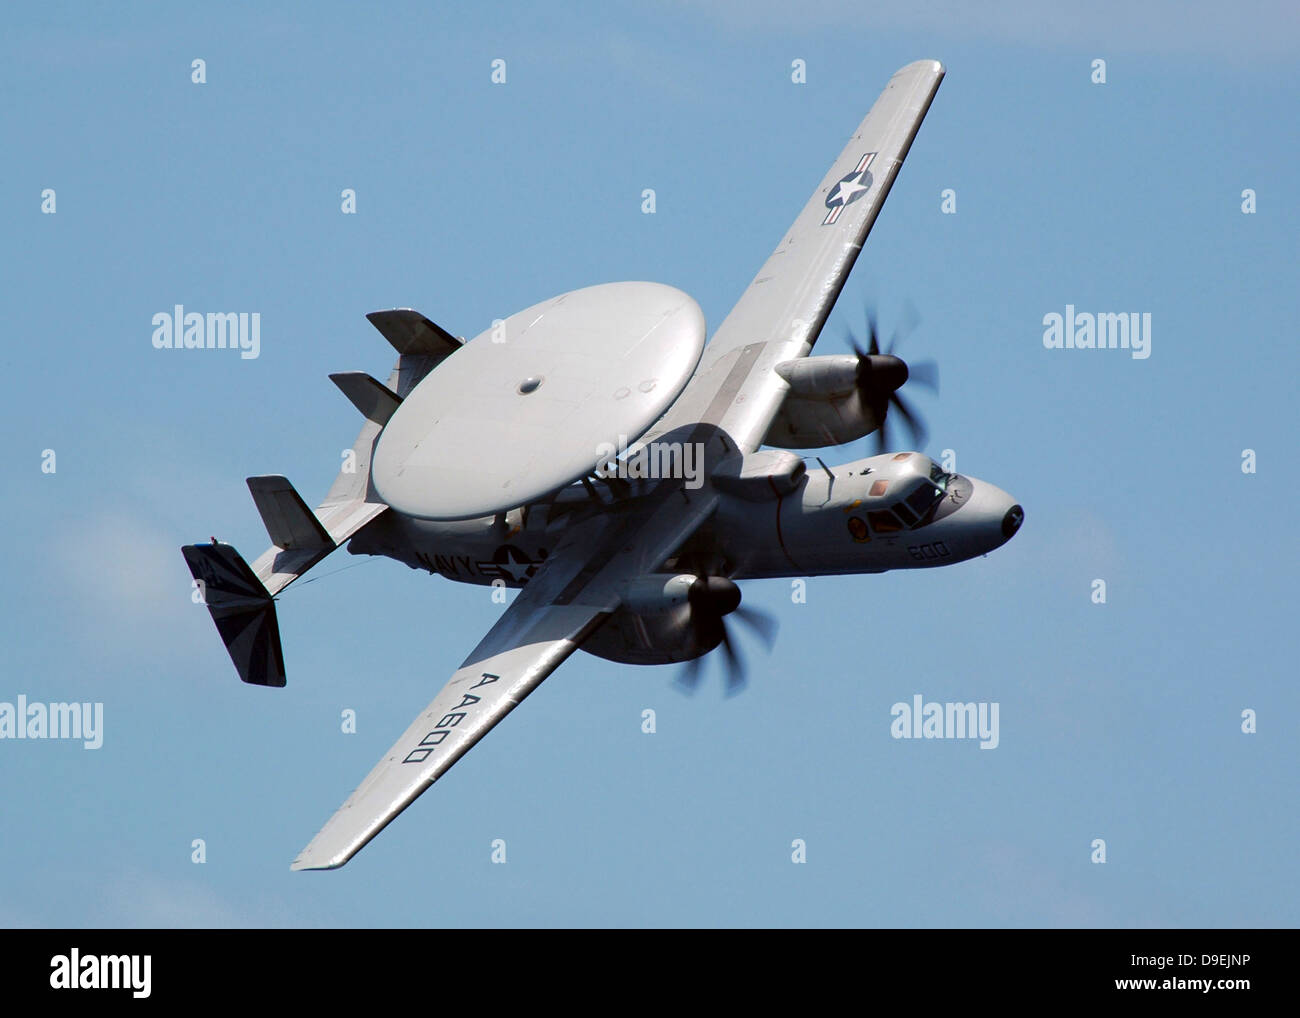 An E-2C Hawkeye executes a high performance fly-by during an Air Power Demonstration. Stock Photo